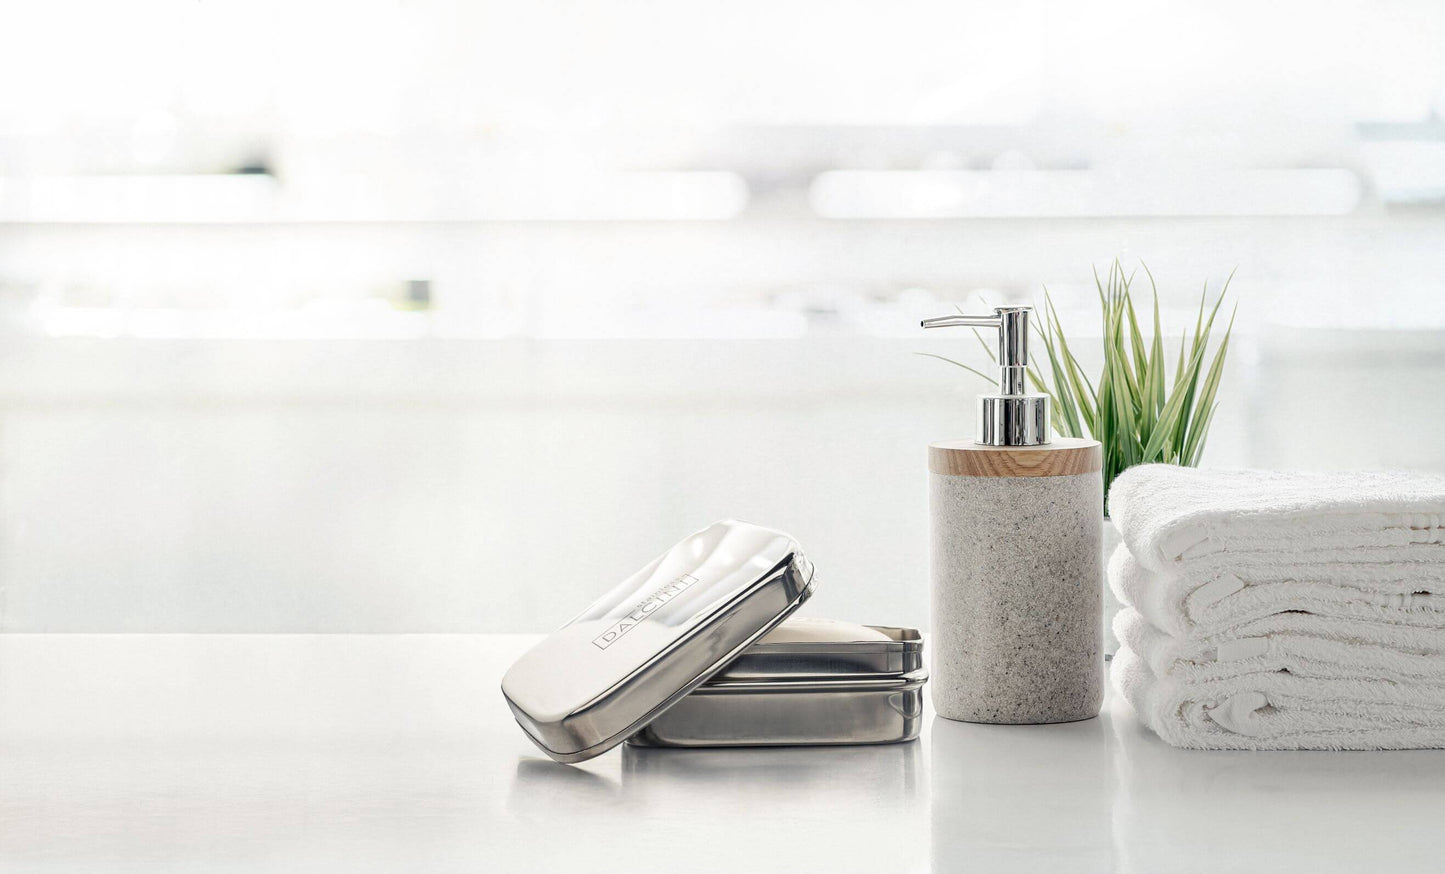 Food-grade stainless steel soap dish open on bathroom counter next to soap dispenser and folded white towels